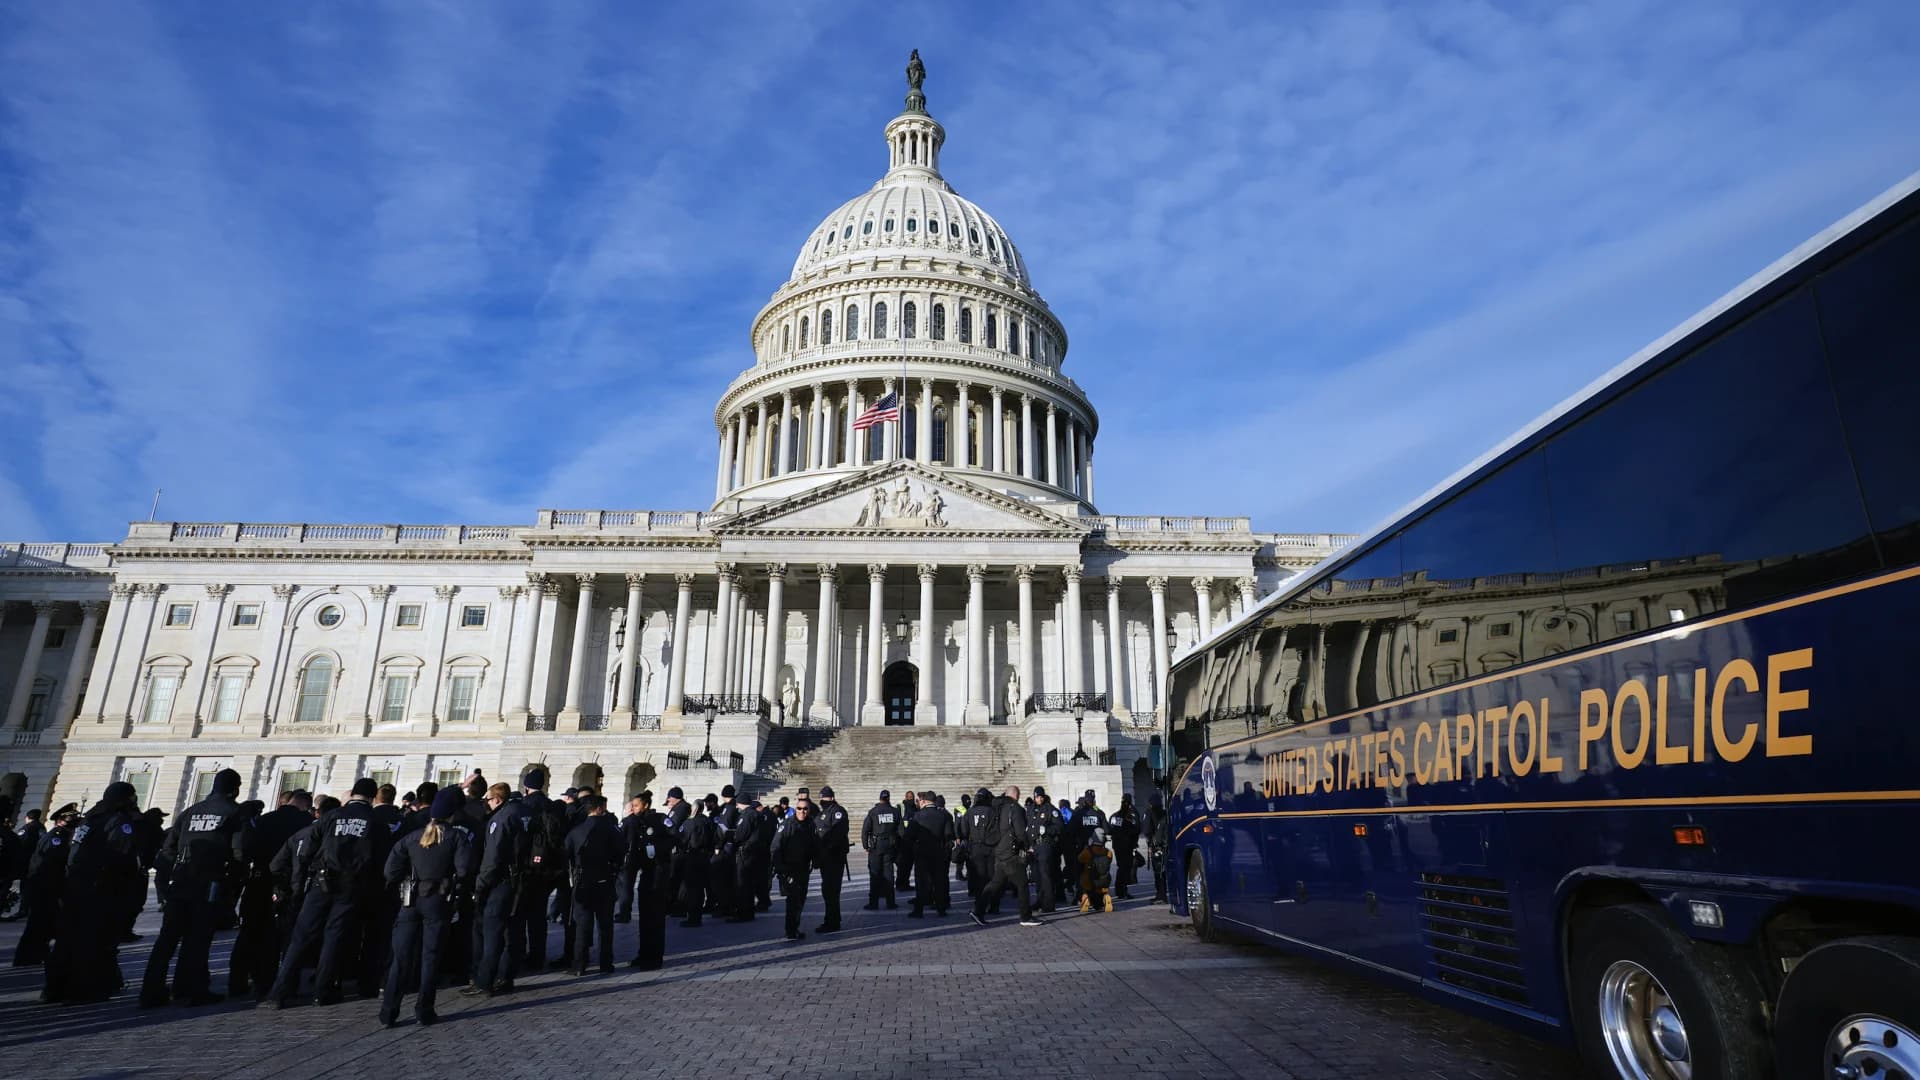 Lawmakers mark 1-year anniversary of Jan. 6 insurrection